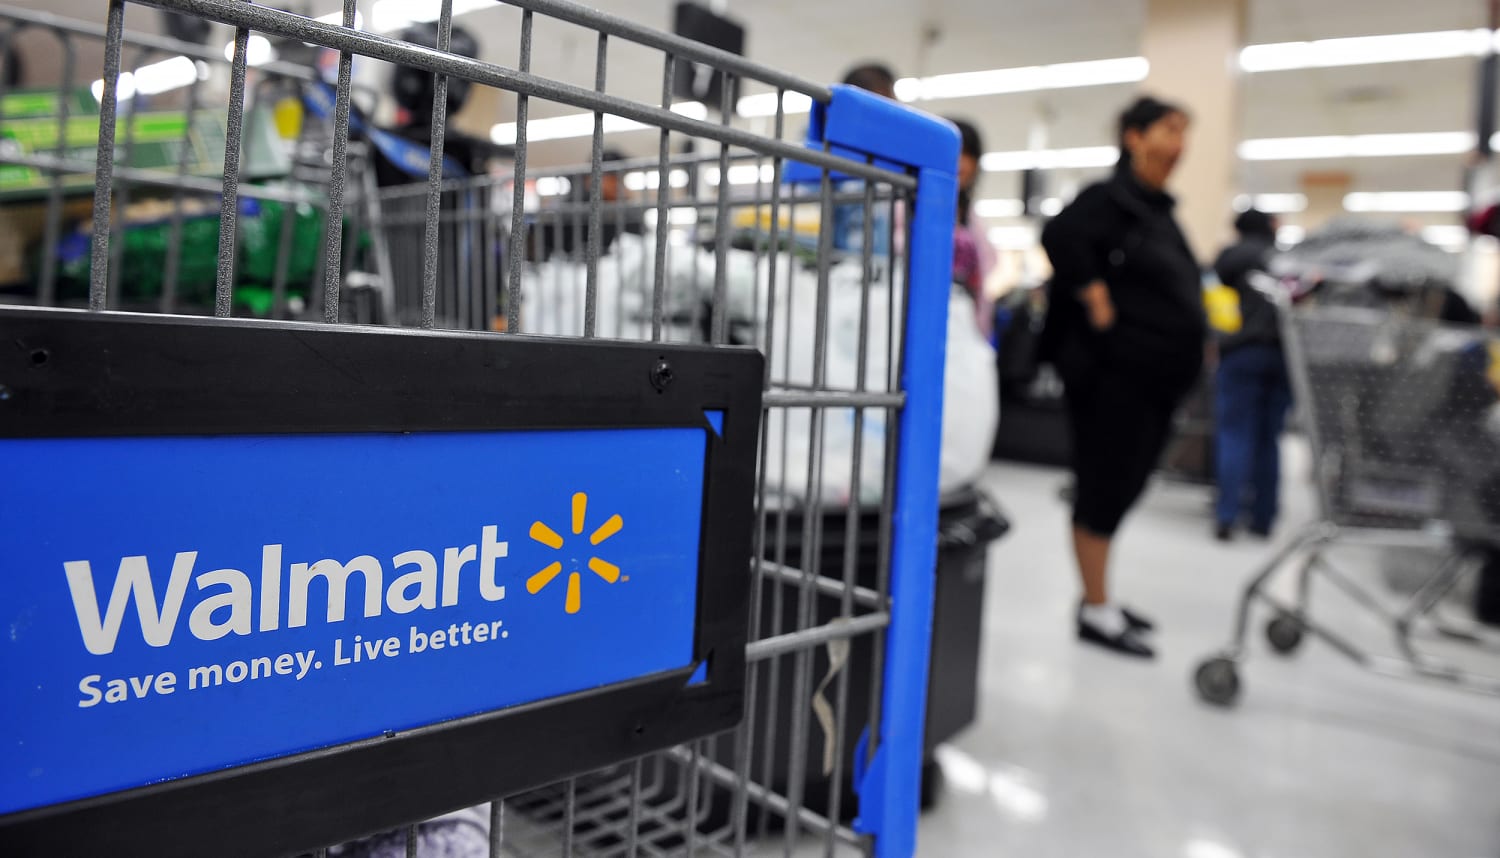 Walmart could owe you up to $500 as part of a settlement: How to file a claim